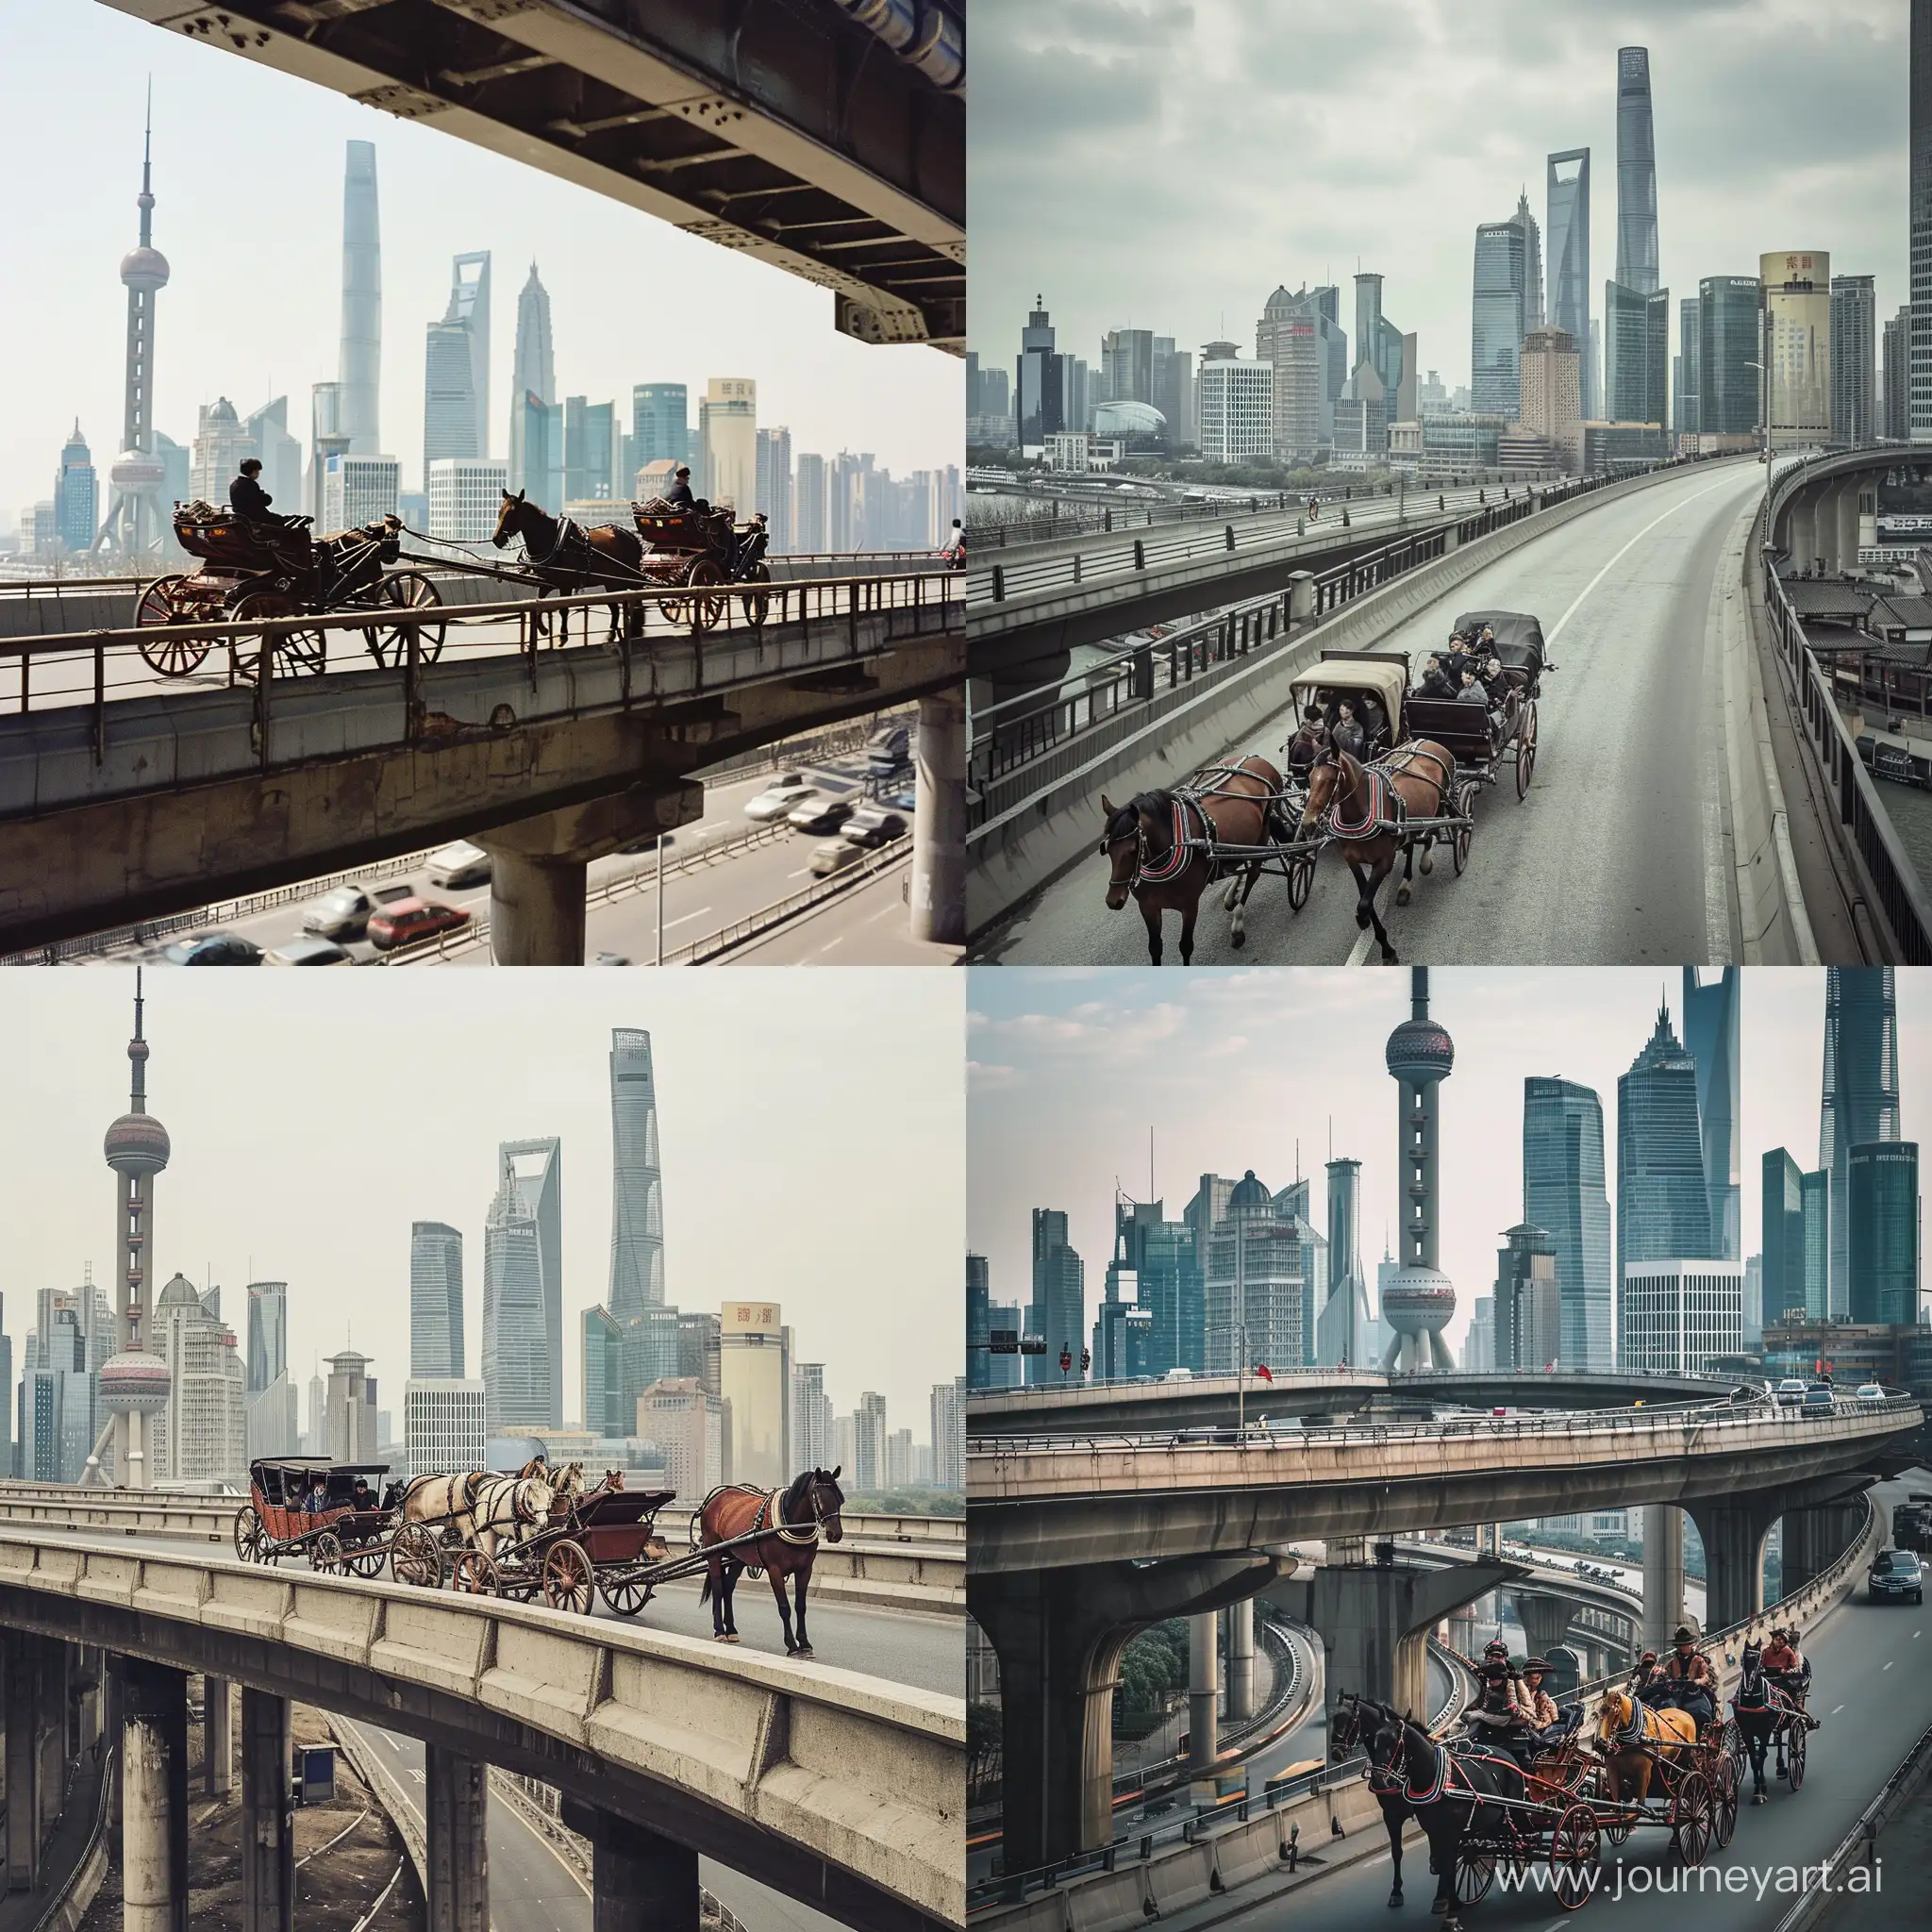 Shanghai-HorseDrawn-Carriages-on-Elevated-Highways-with-Lujiazui-Skyline